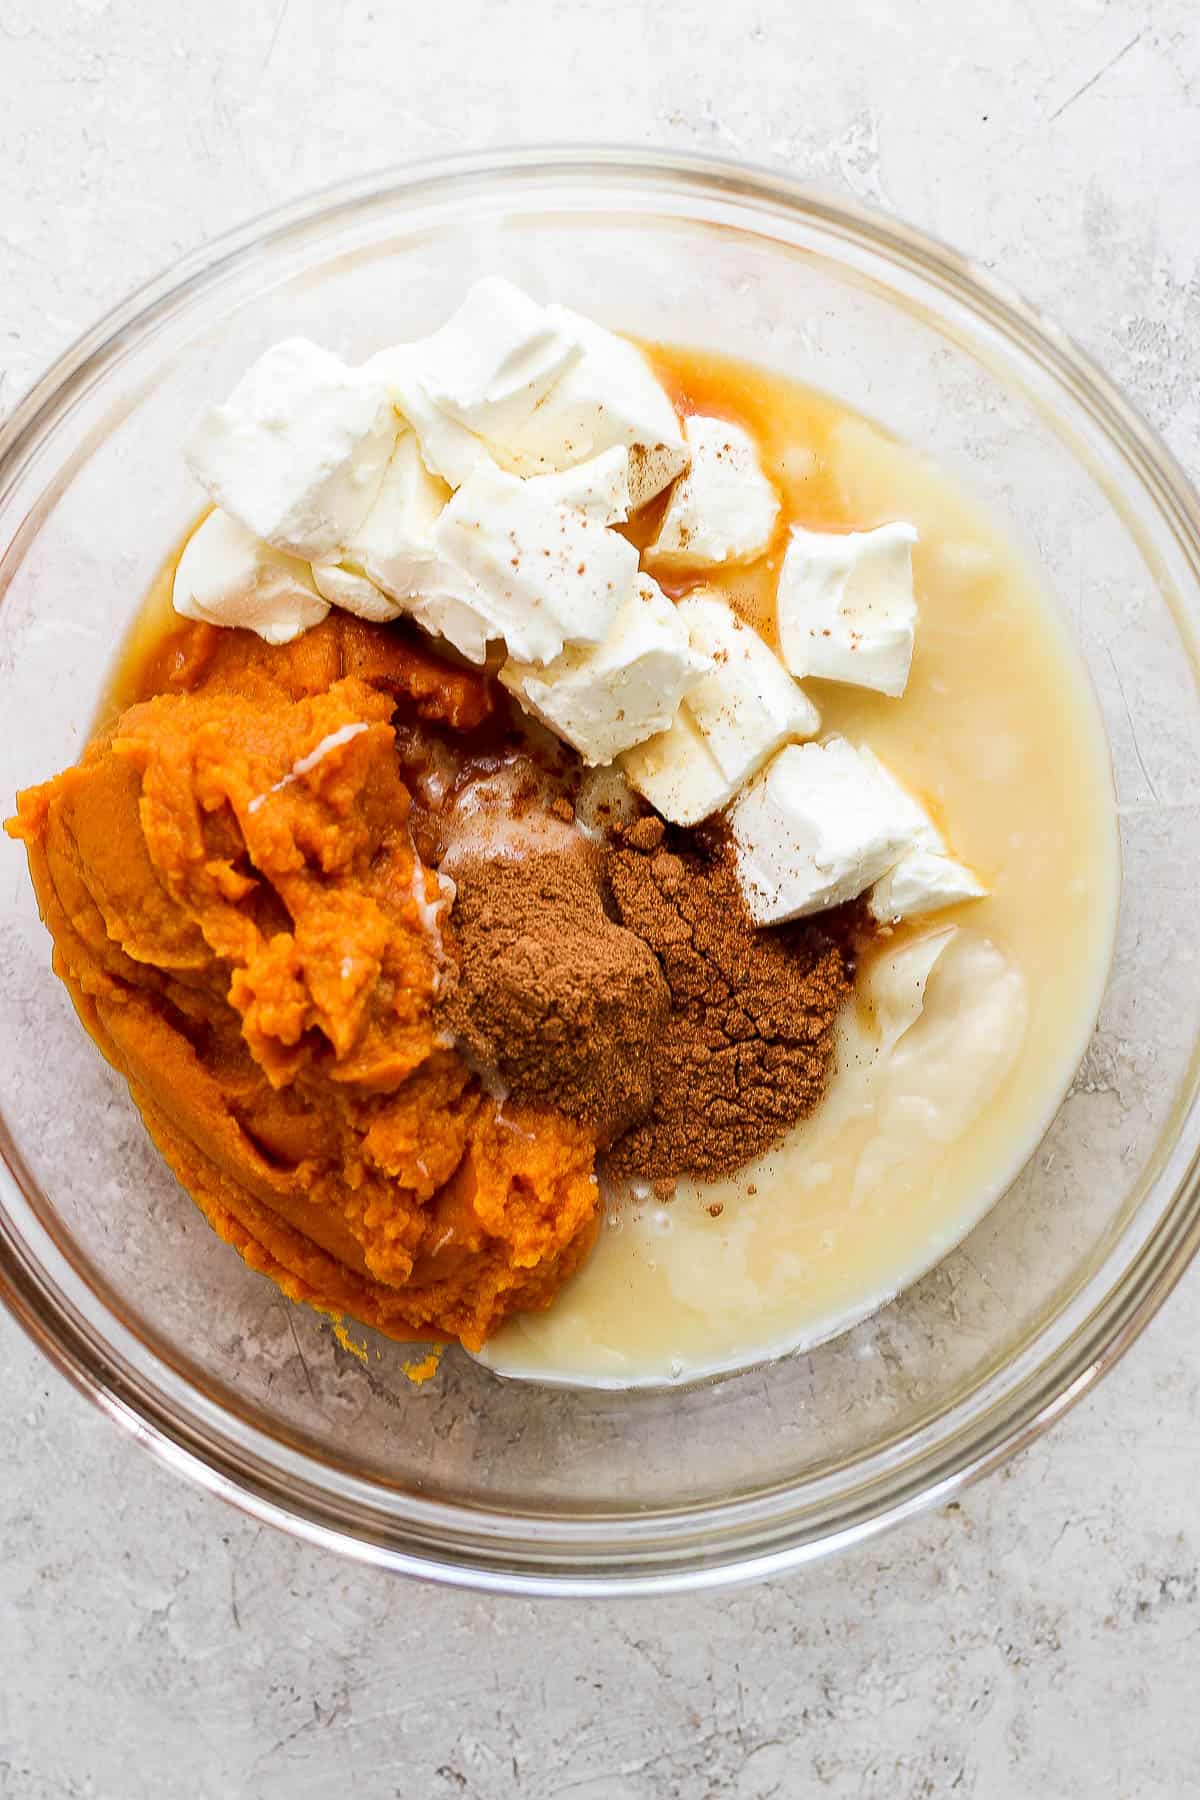 Ingredients for this pumpkin pie recipe in a large glass bowl.